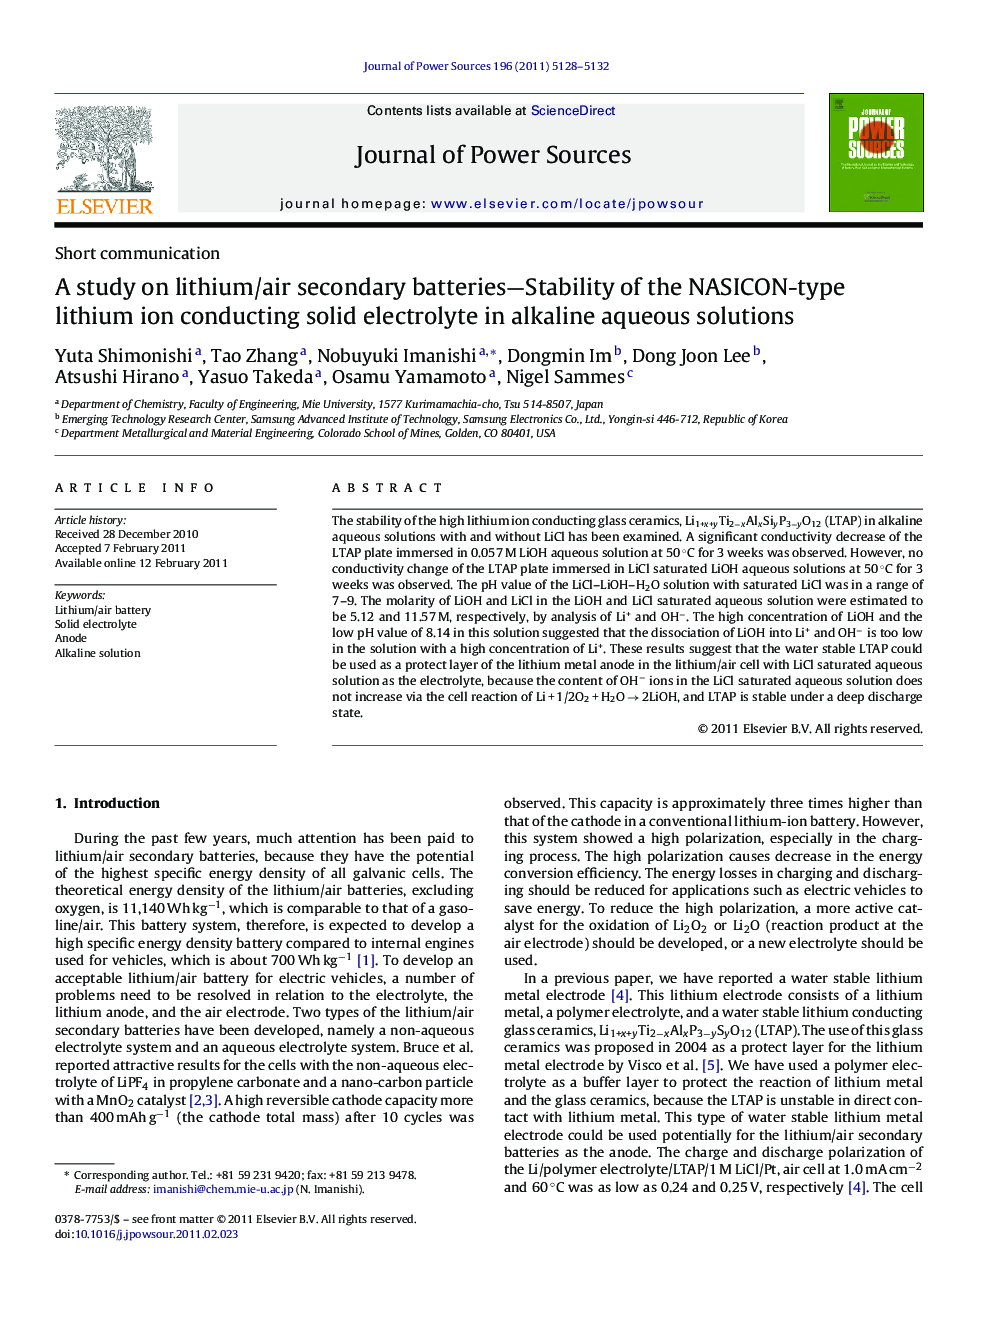 A study on lithium/air secondary batteries—Stability of the NASICON-type lithium ion conducting solid electrolyte in alkaline aqueous solutions